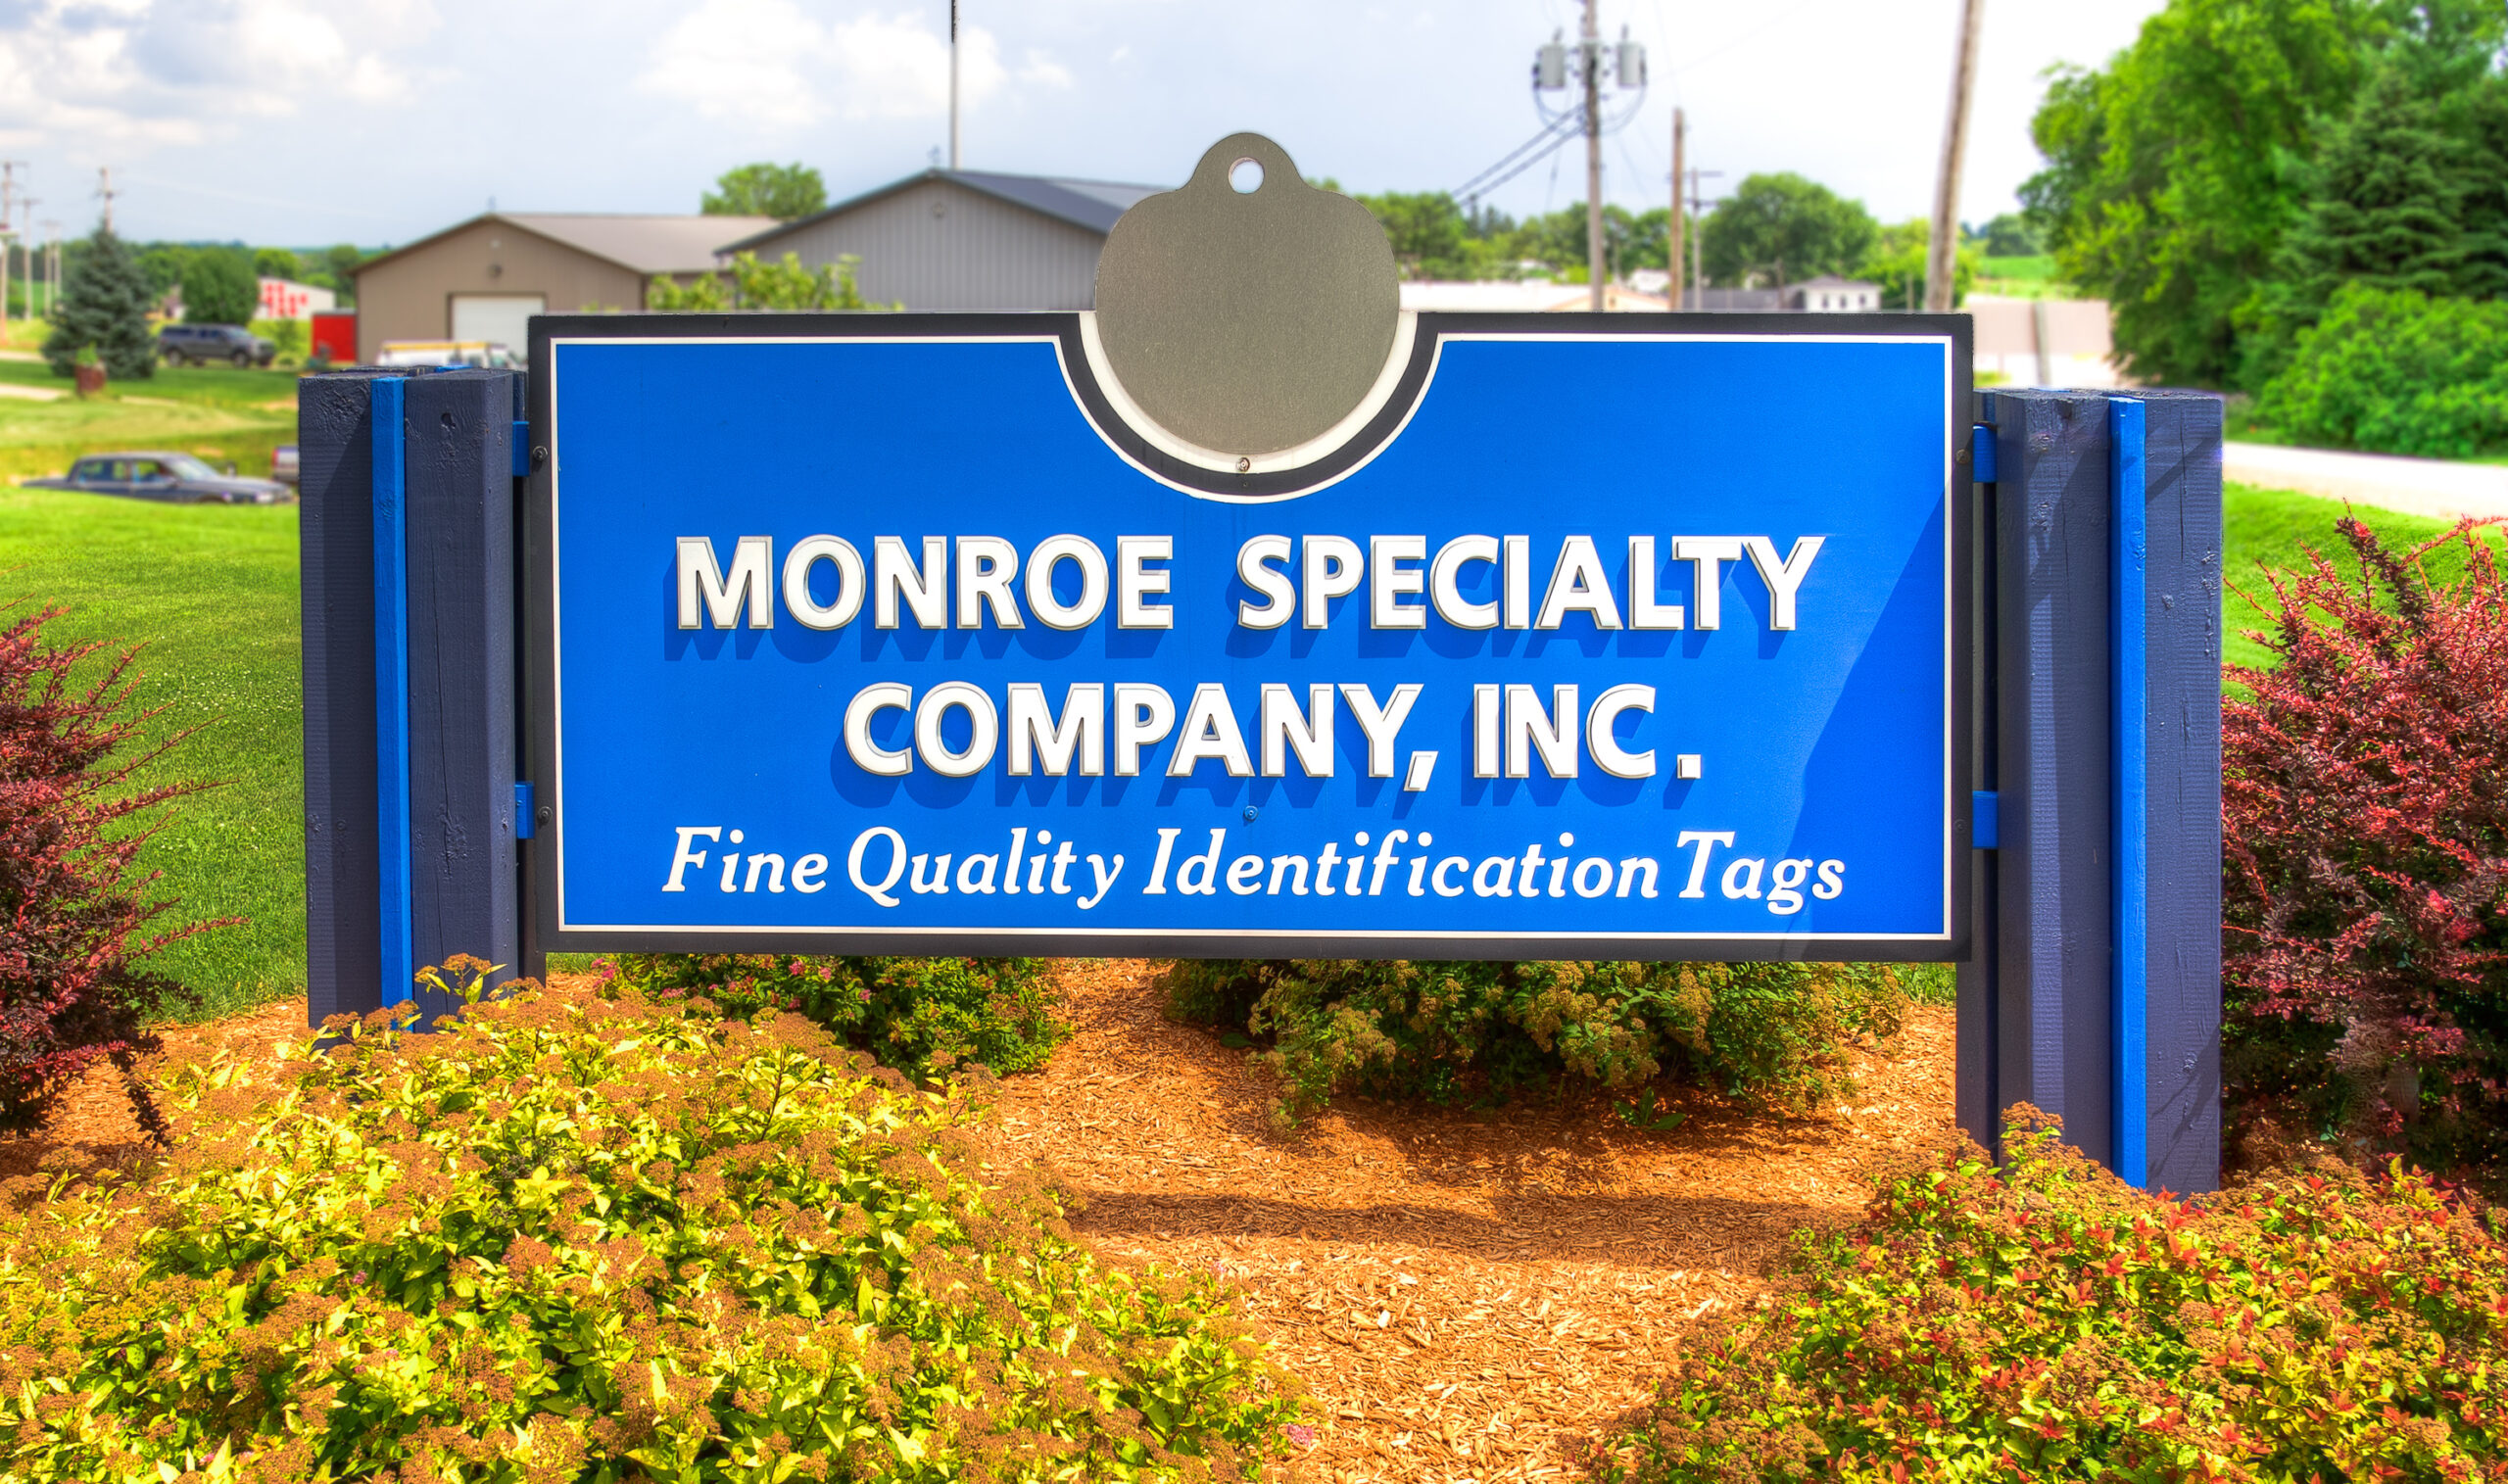 Monroe Specialty Company, Inc. - Fine Quality Identification Tags